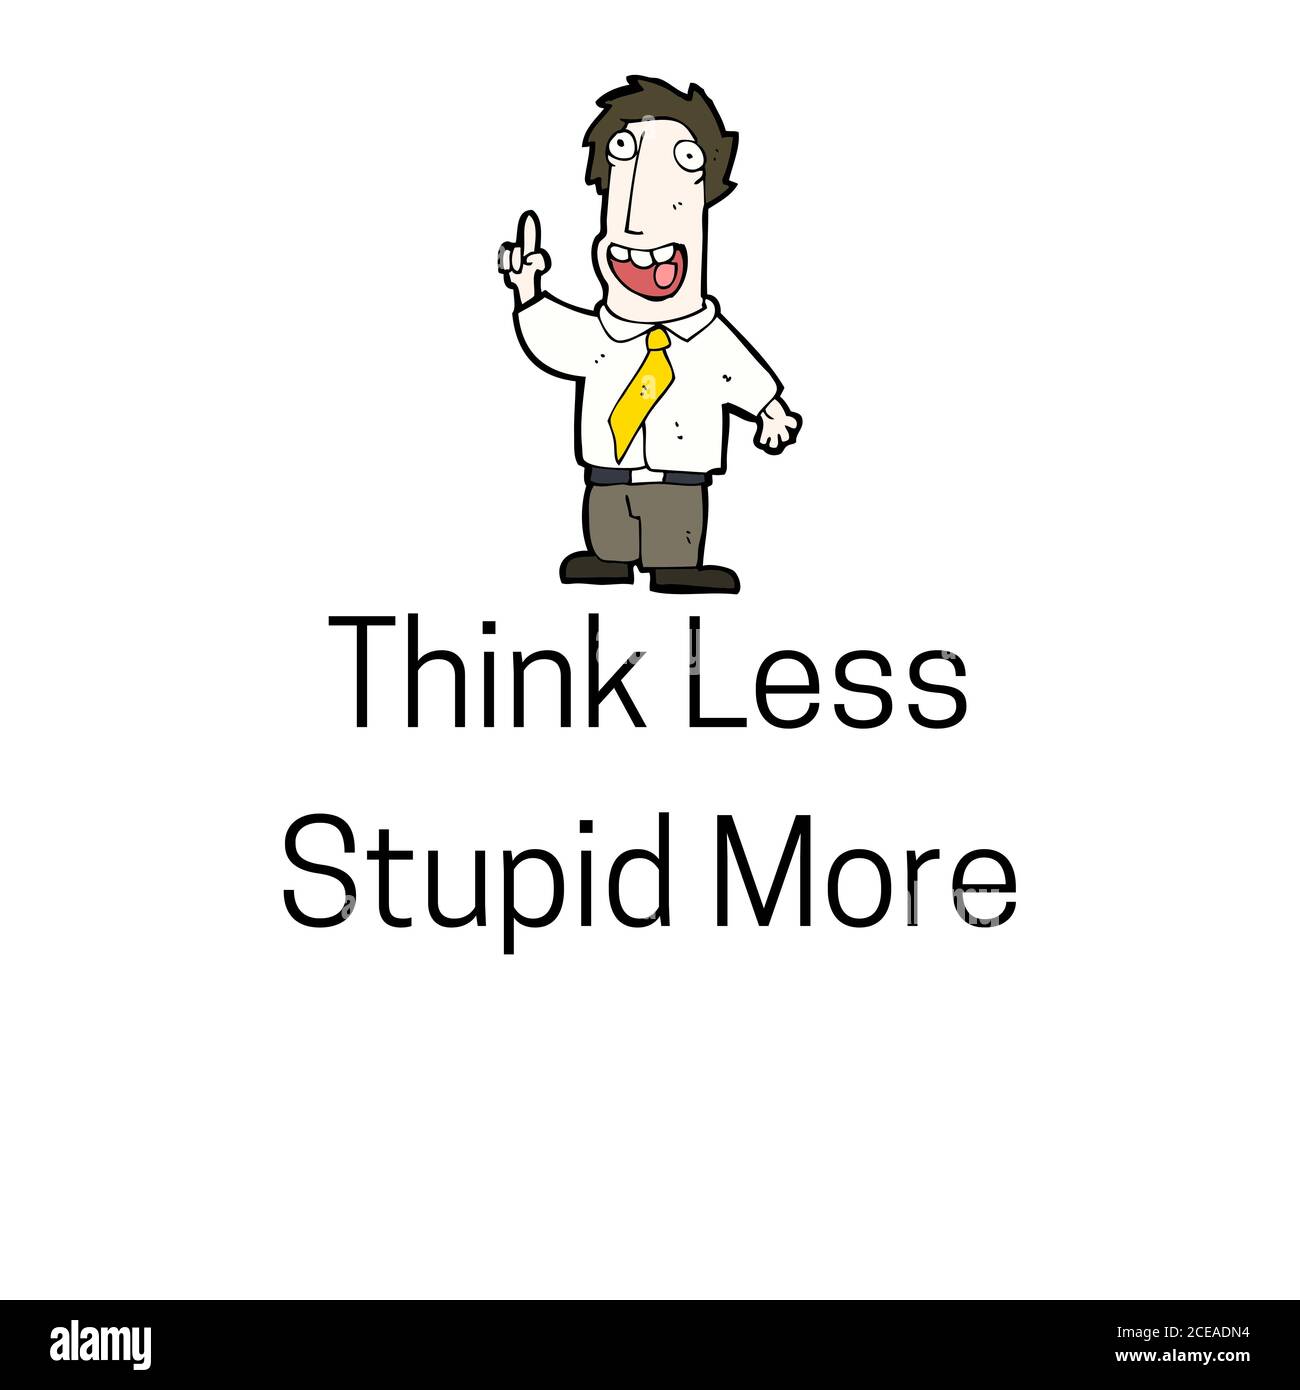 Think less stupid more Stock Photo